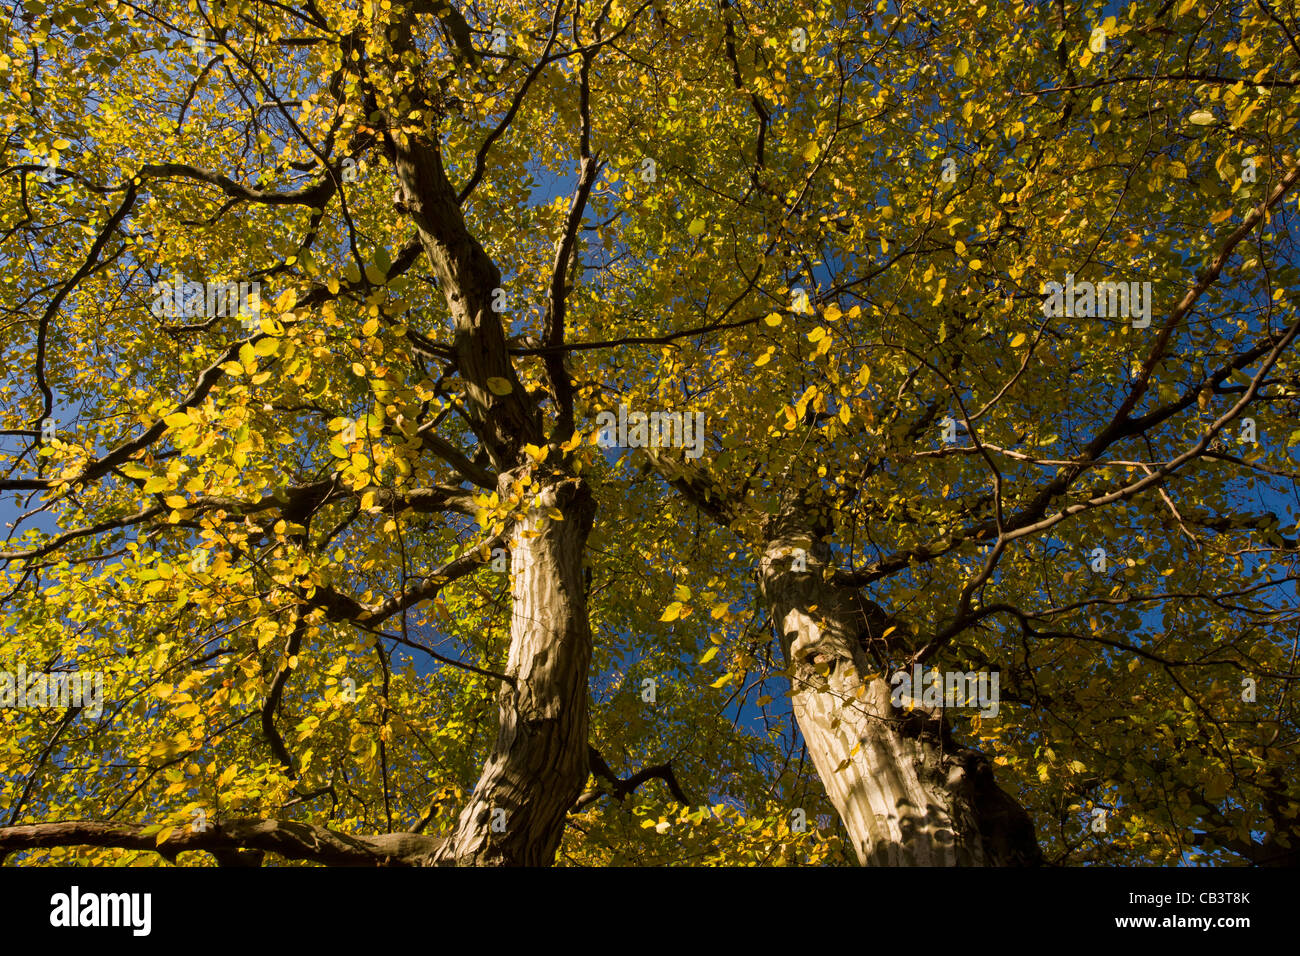 Old hornbeams (Carpinus betulus) in autumn in Great Wood, Plantlife Reserve at Ranscombe Farm, Kent. Stock Photo